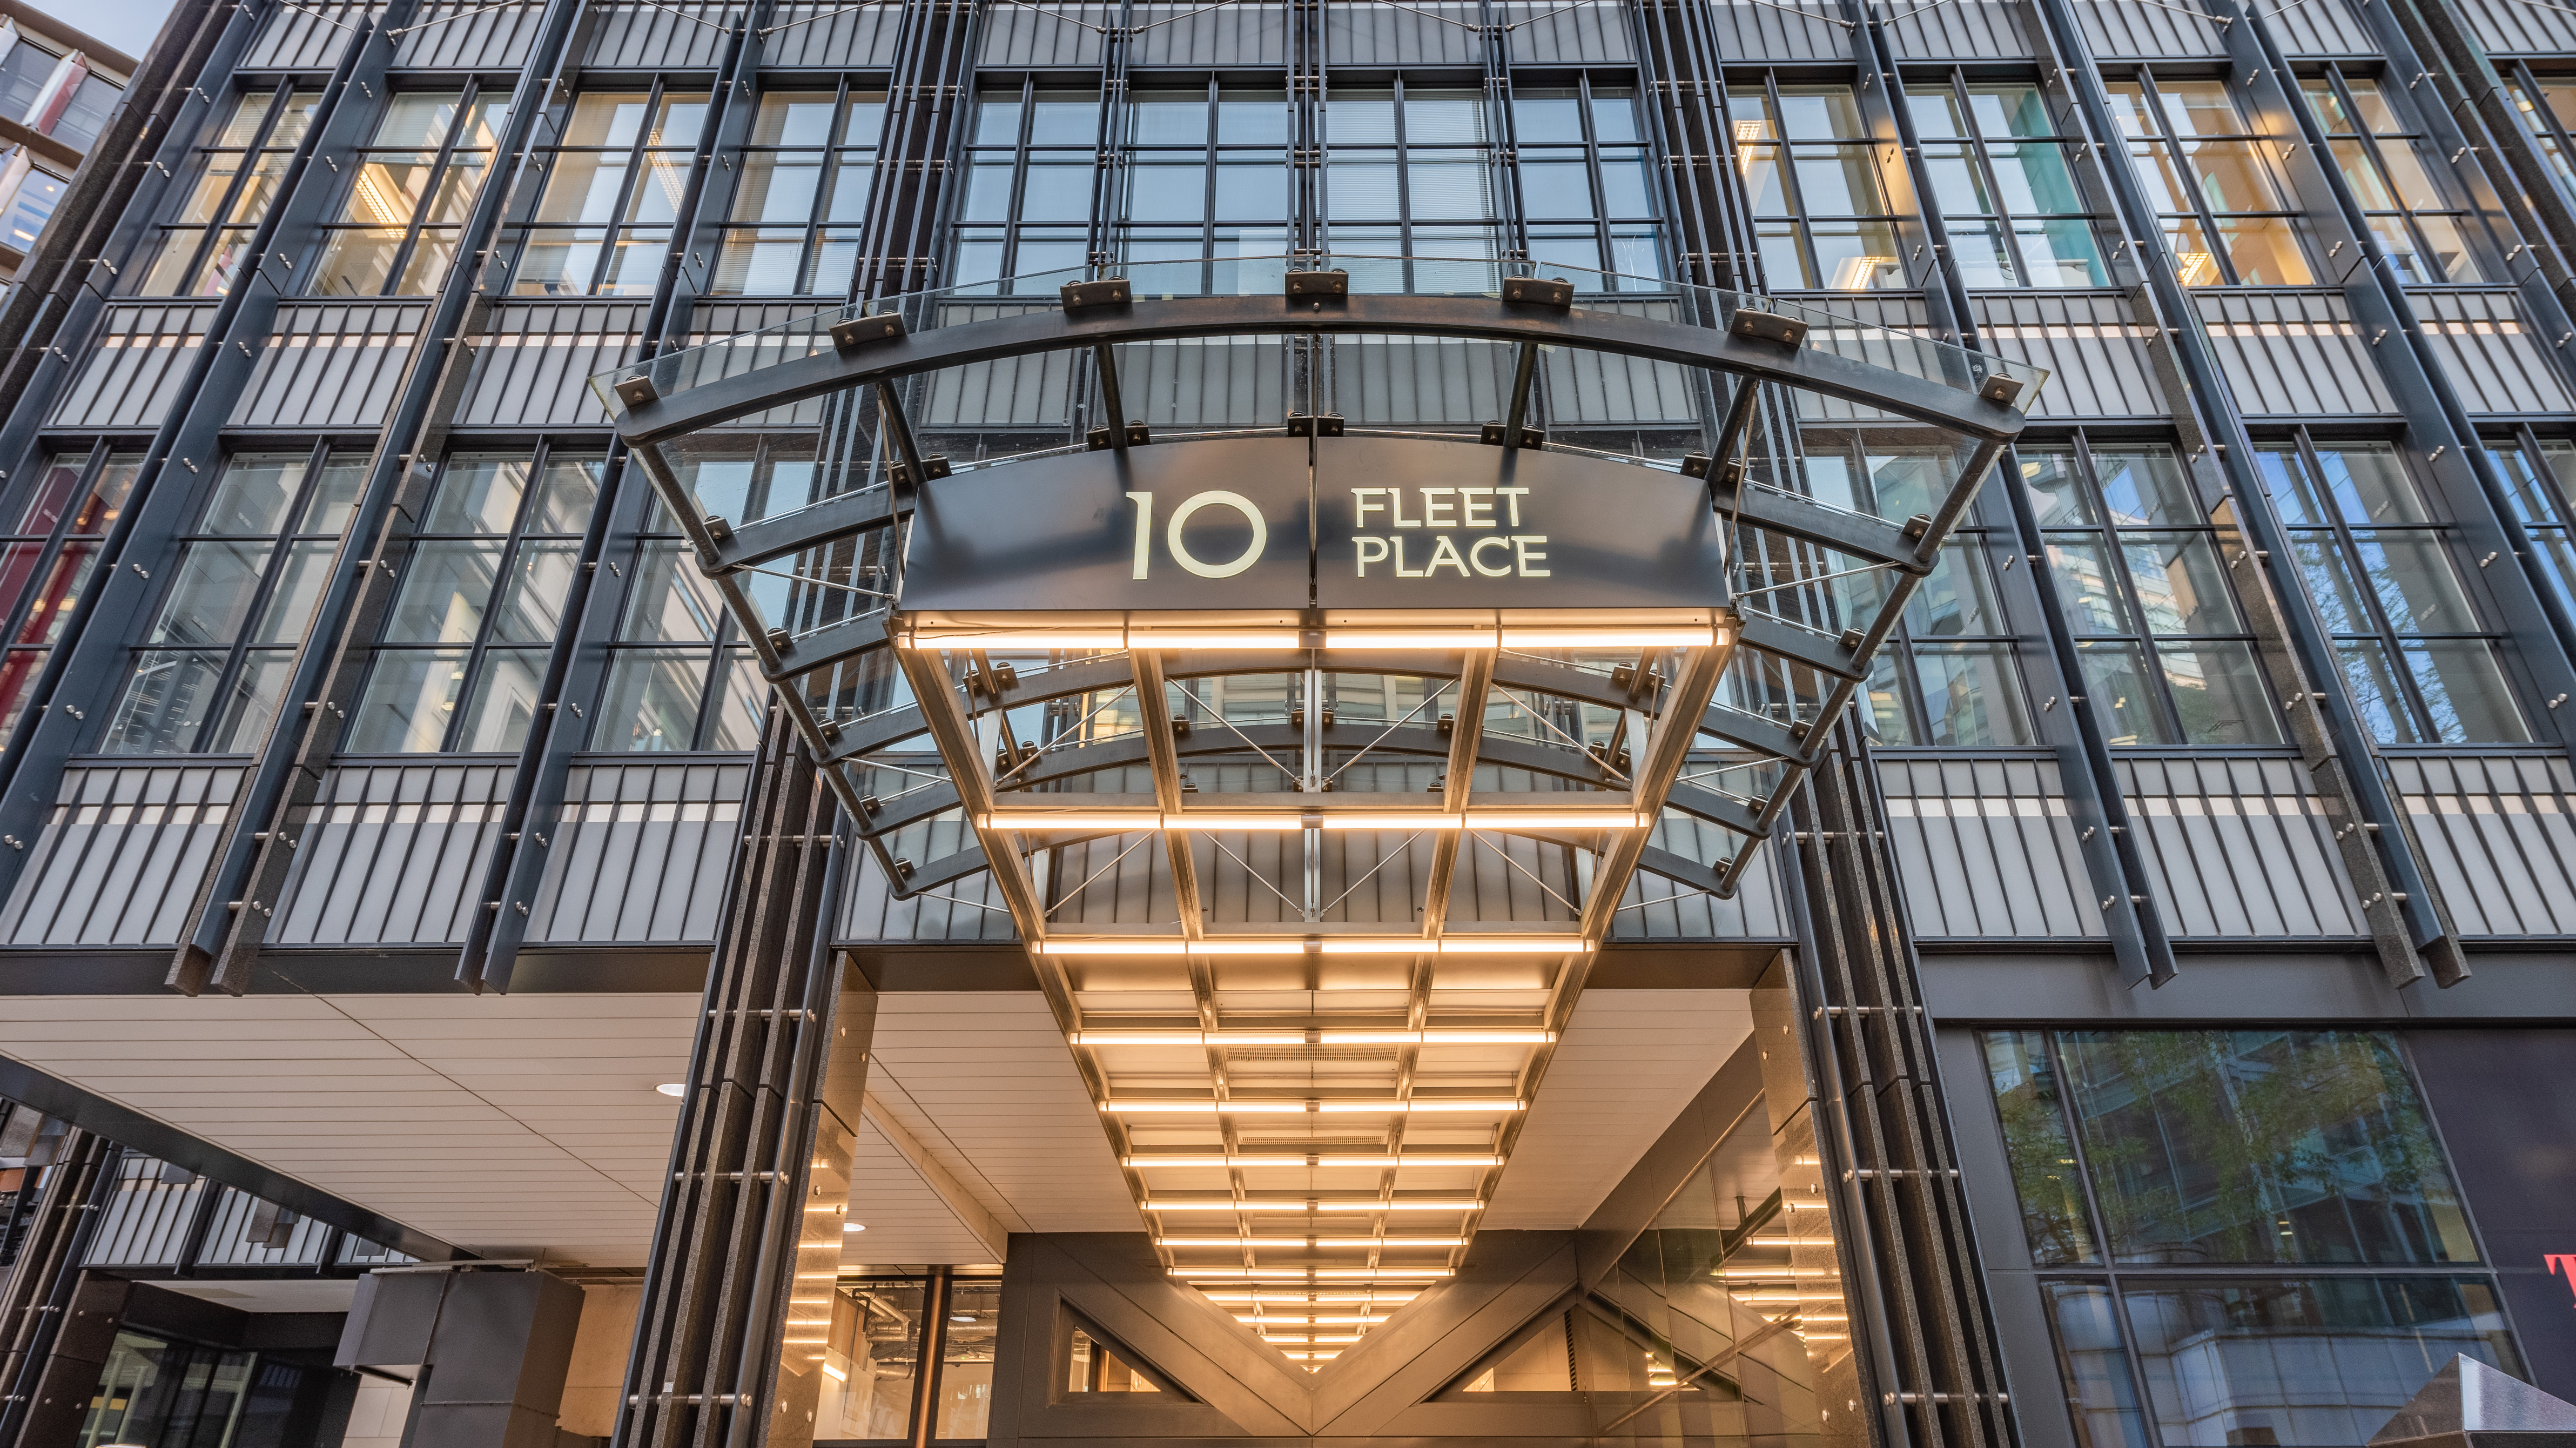 ADDINGTON CAPITAL SECURES FURTHER NEW DEALS AT 10 FLEET PLACE, LONDON EC4: 20,000 SQ FT LET TO BROKERAGE BUSINESS: OB – And Mott MacDonald signs new long-term leases in newly refurbished landmark office building.